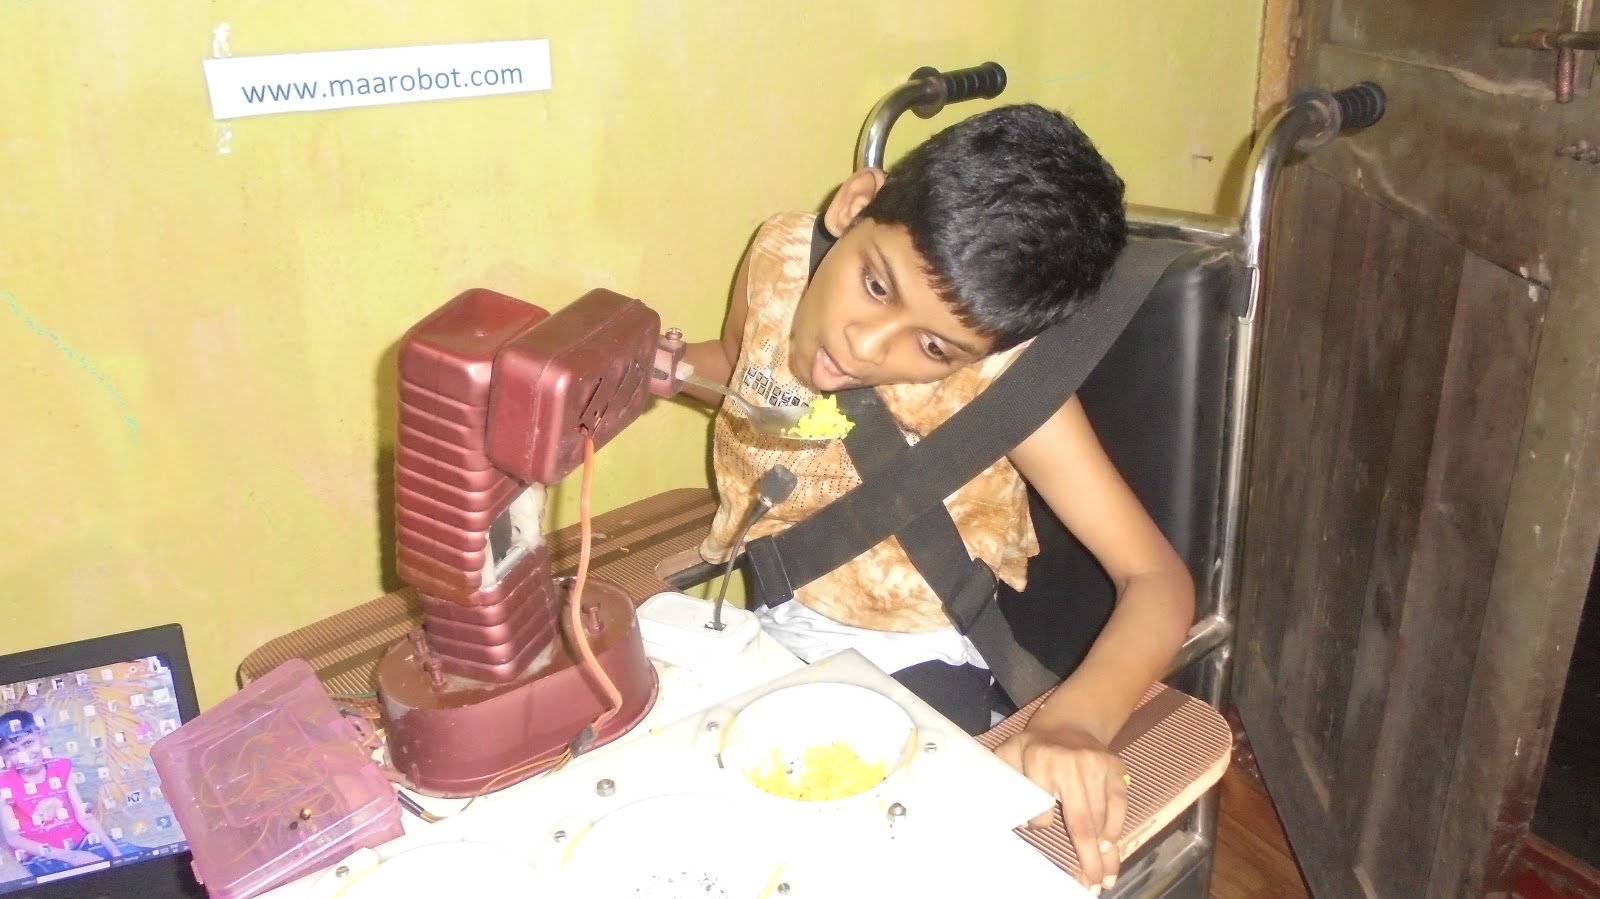 daily wage labourer designs robot for his daughter